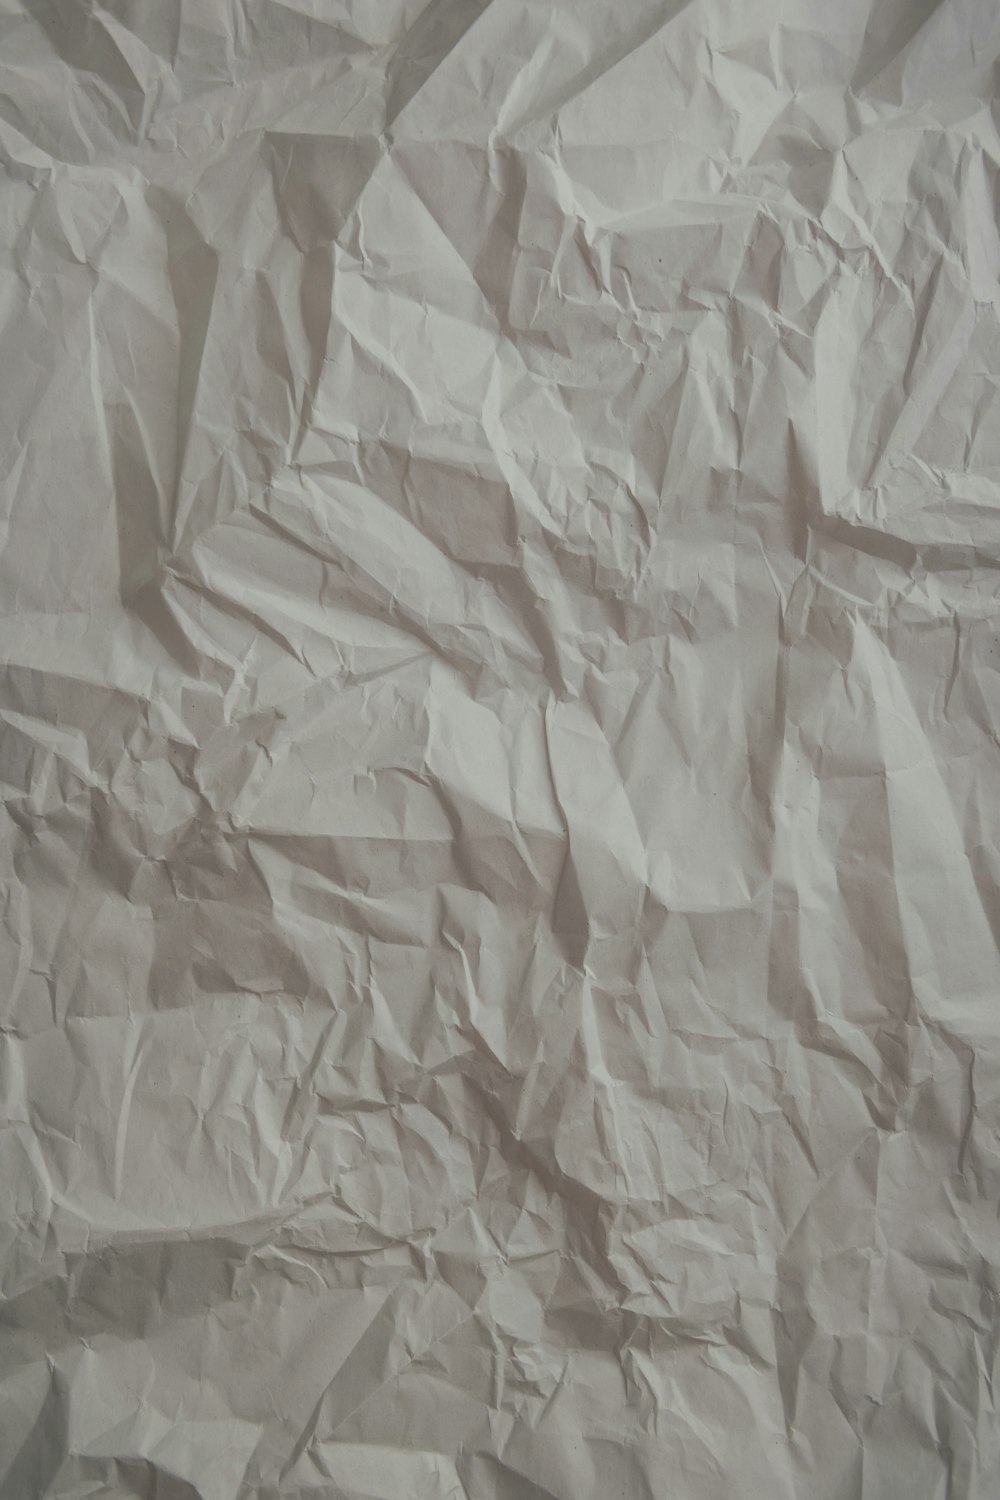 a piece of white paper that has been wrinkled